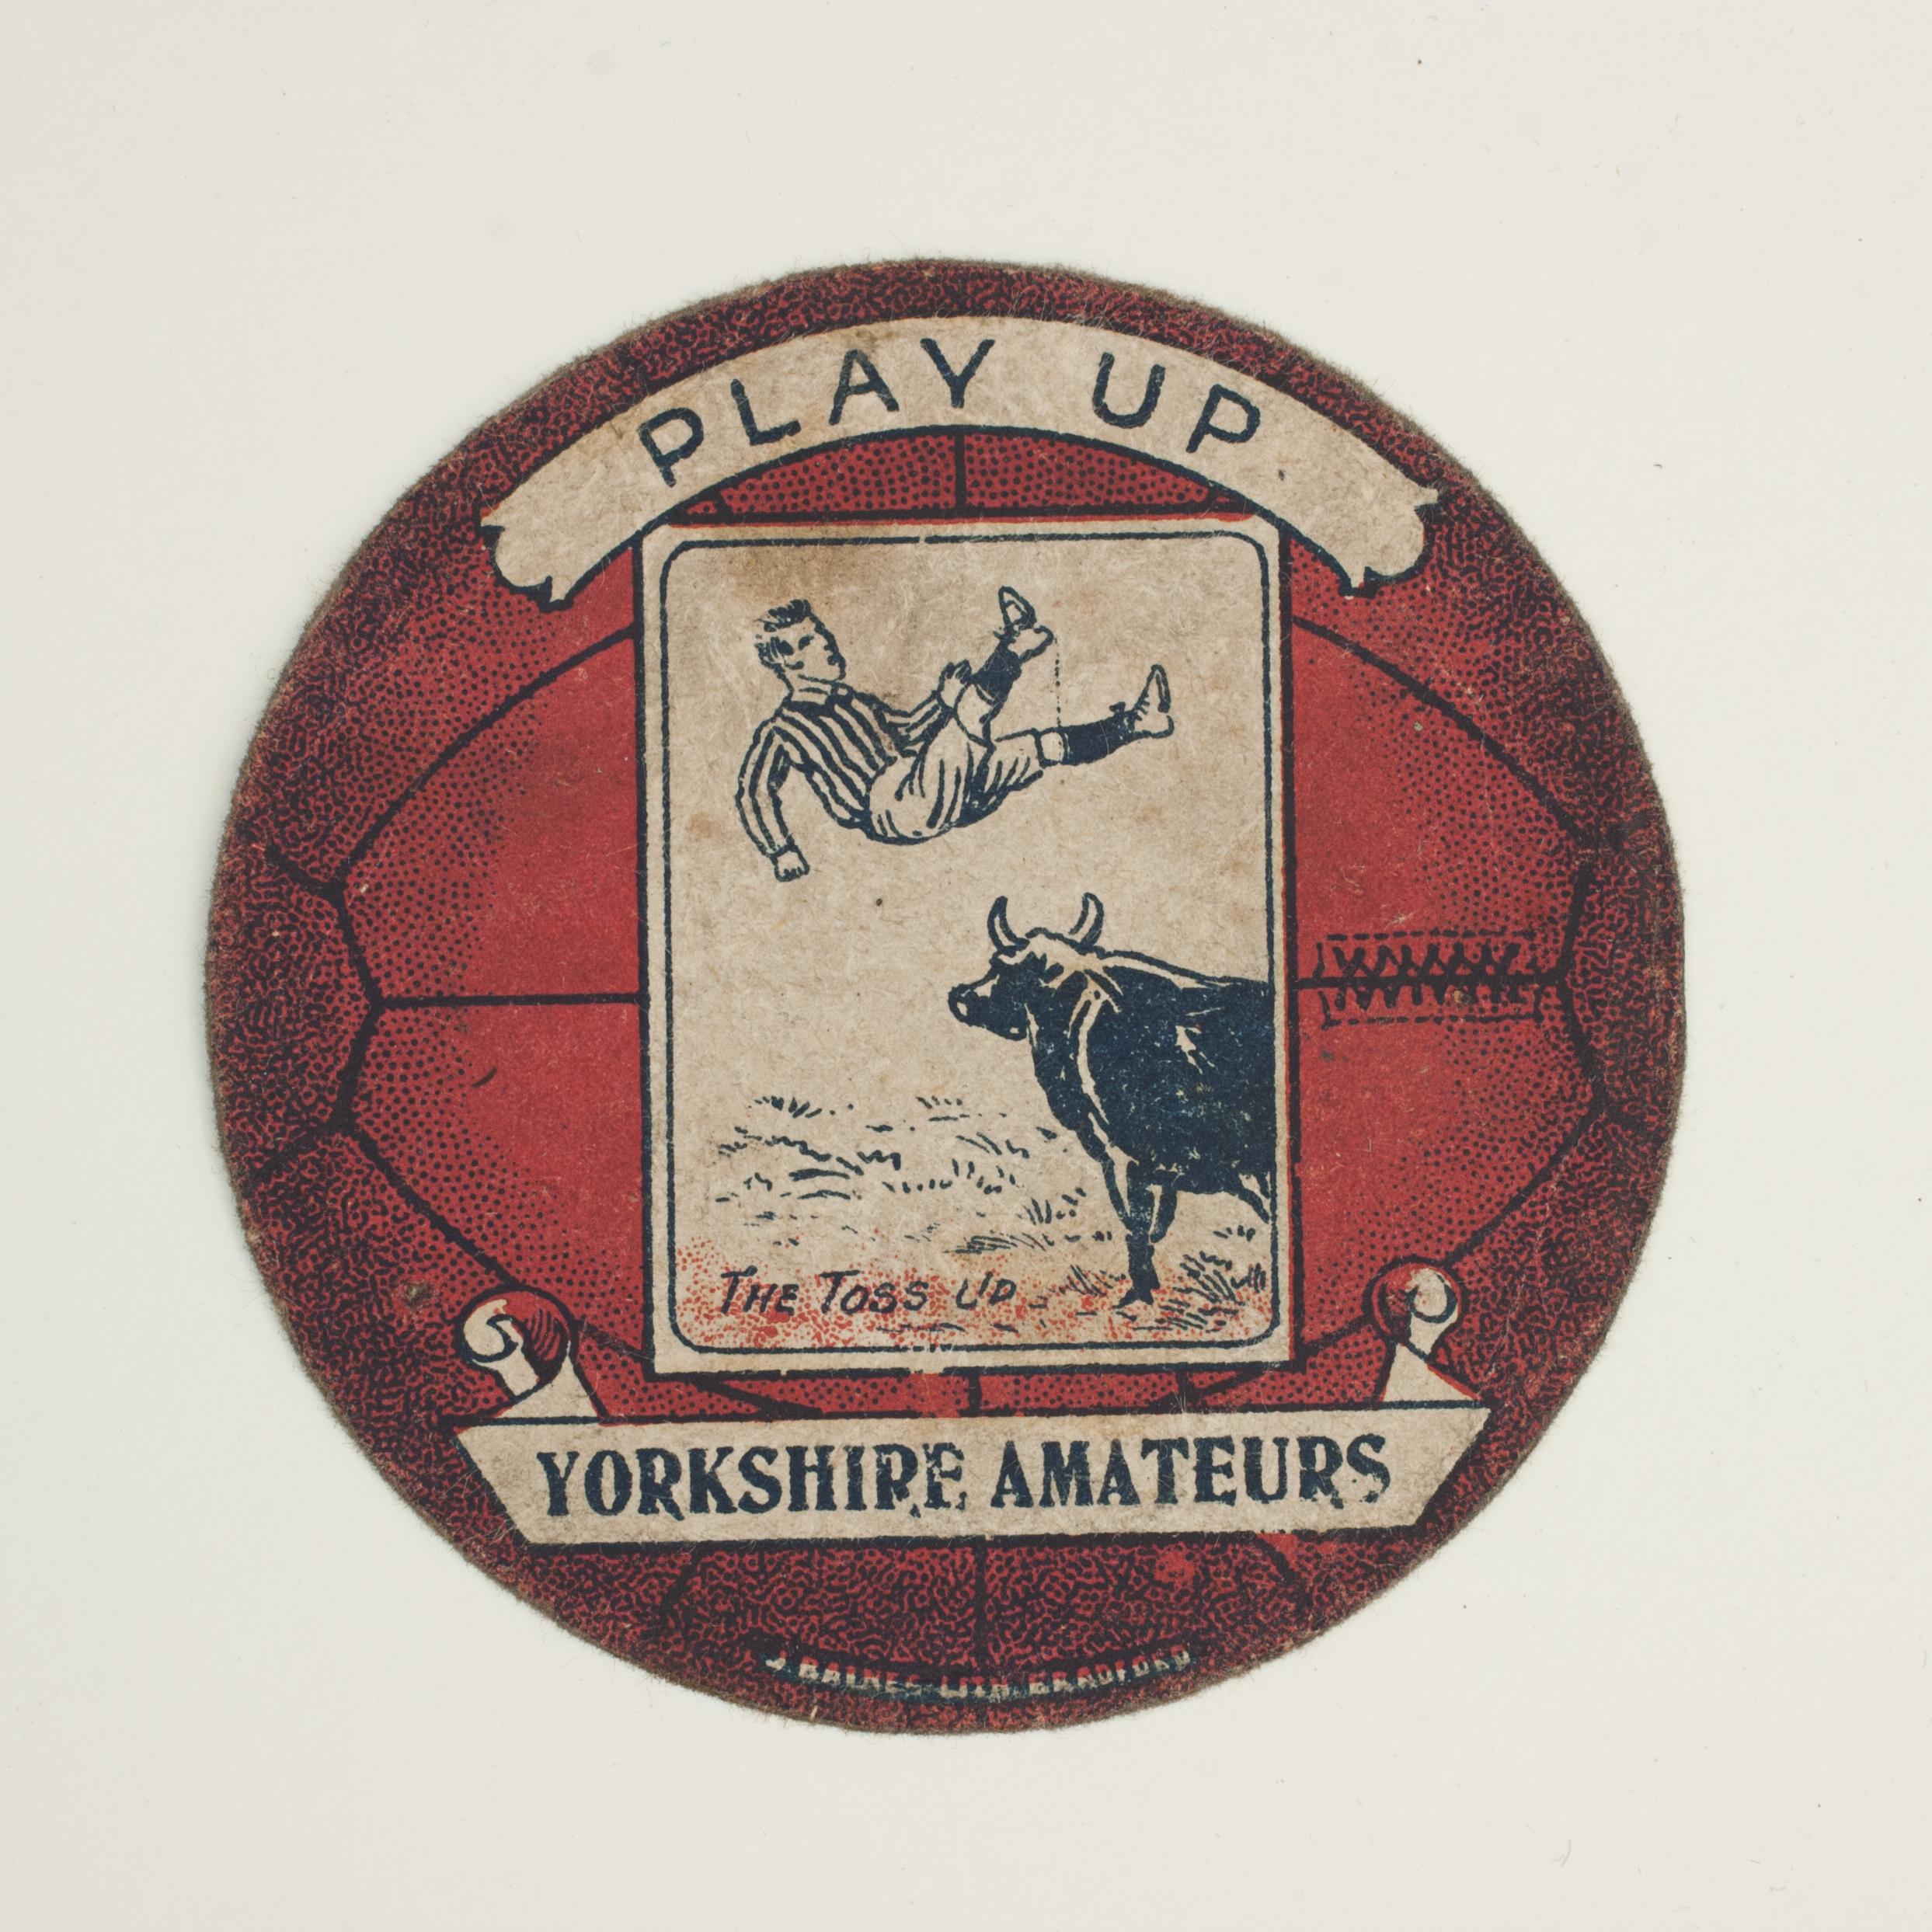 Sporting Art Baines Football Trade Card, Yorkshire Amateurs Play Up For Sale